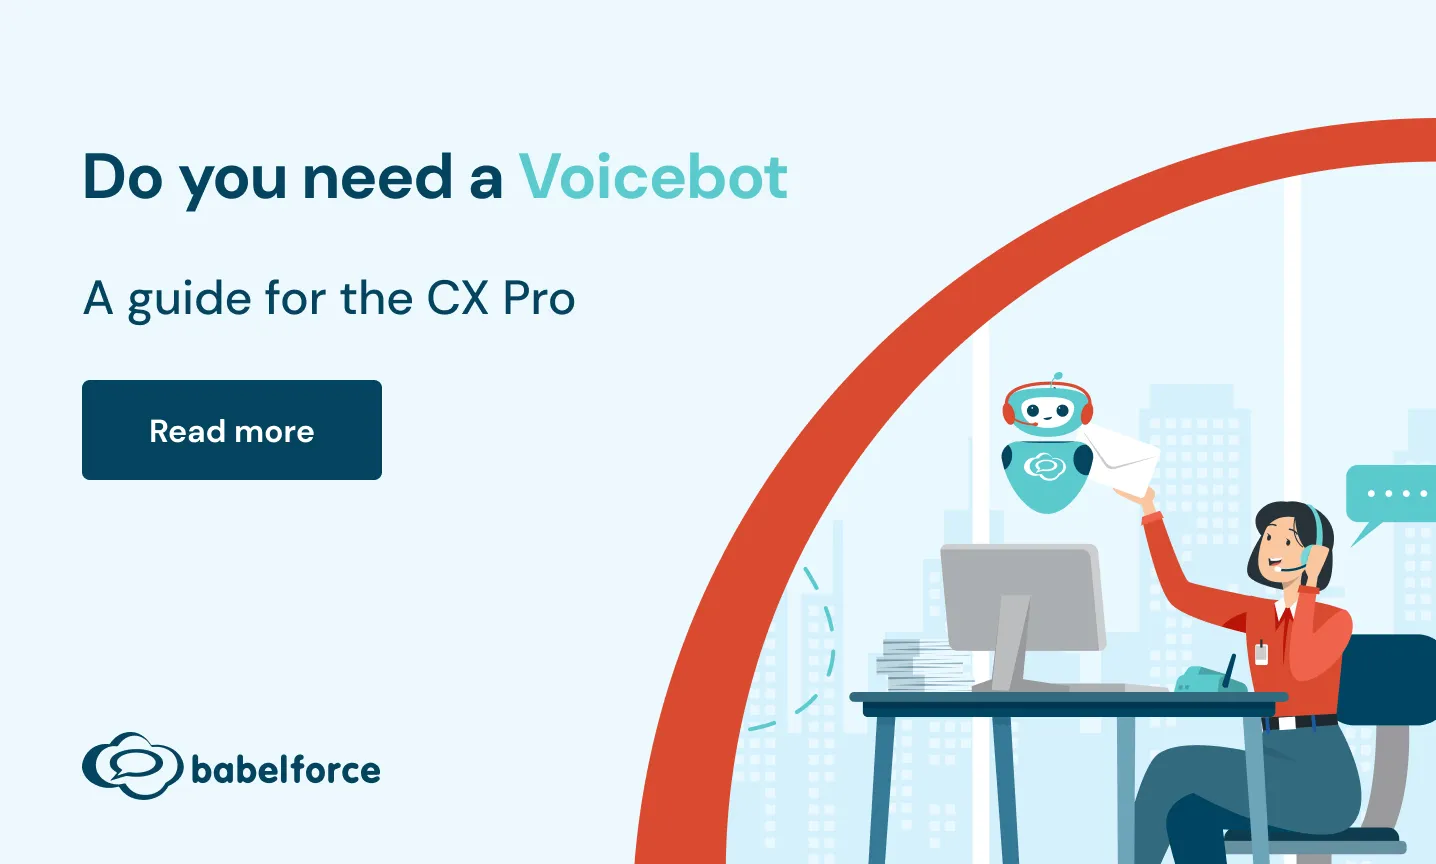 Do you need a Voicebot?